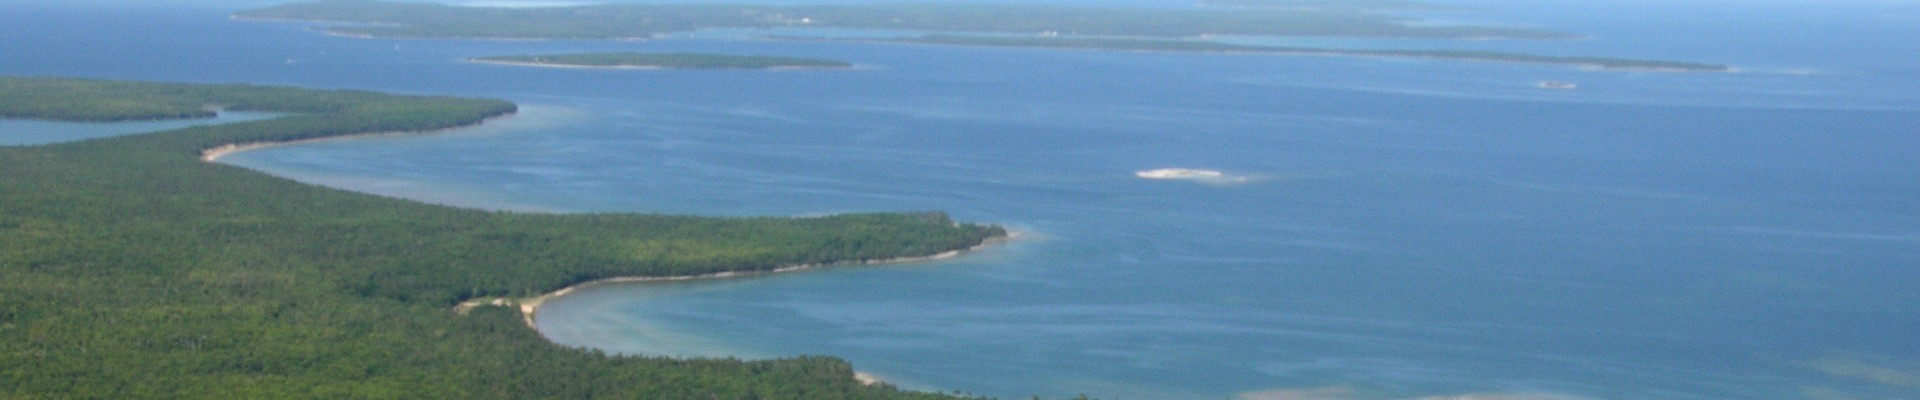 The lake and lakeshore from the air.